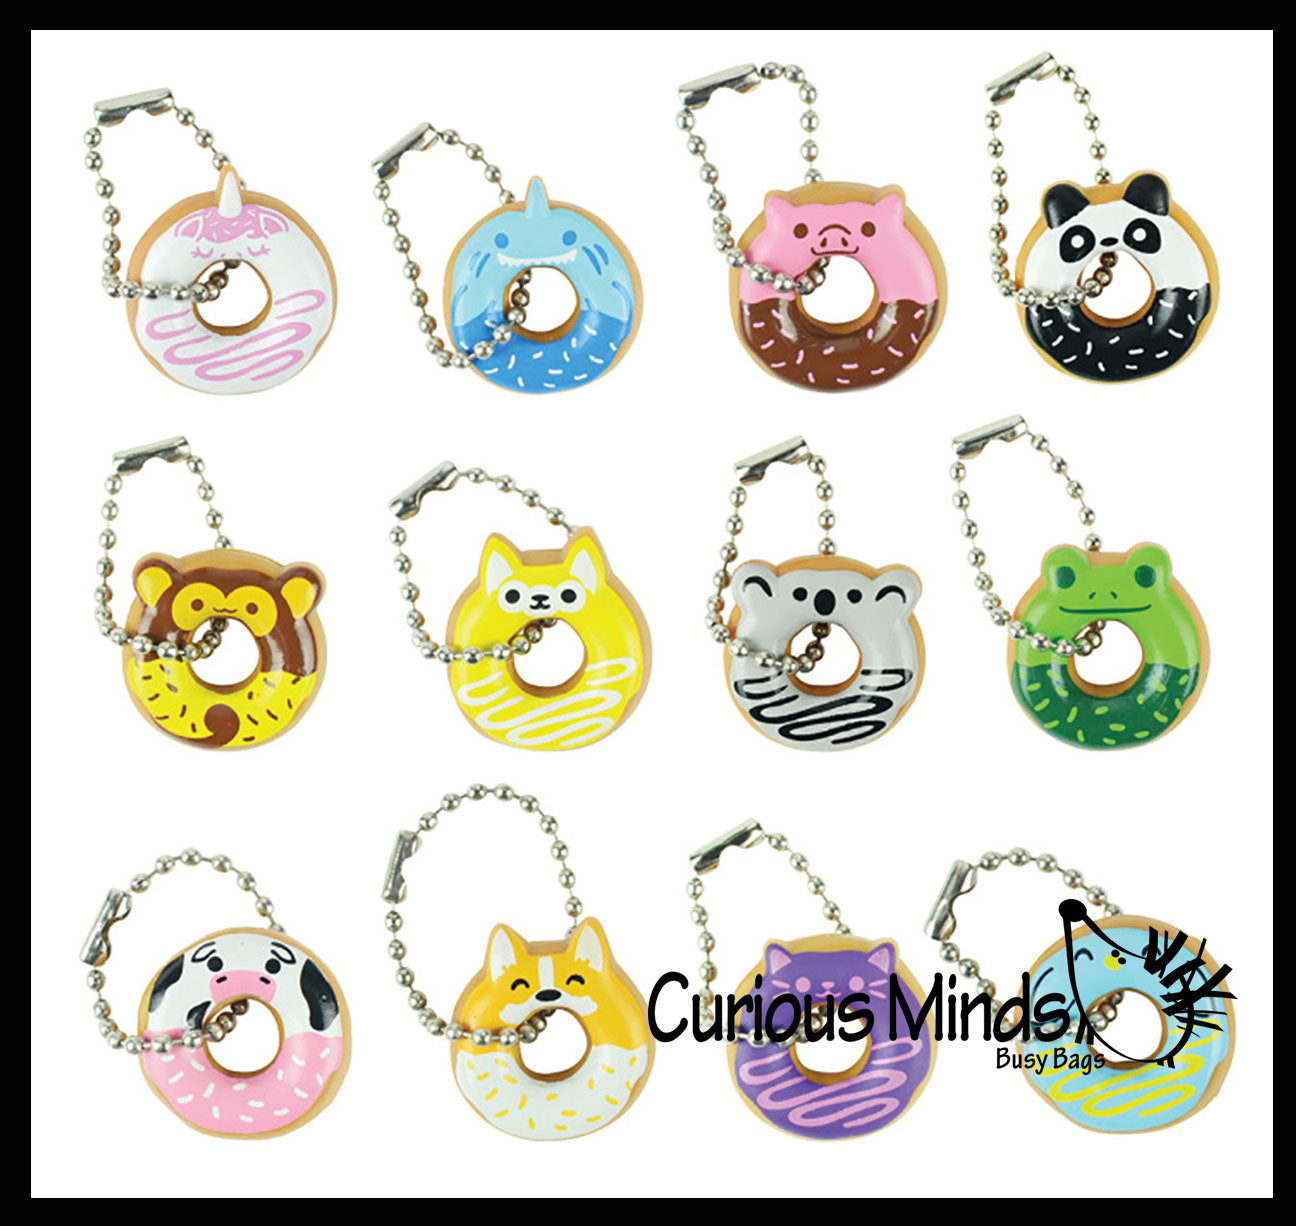 Curious Minds Busy Bags Cute Donut Animal Keychain Figurines - Mini Toys - Easter Egg Filler - Small Novelty Prize Toy - Party Favors - Gift Set of 12 - 1 of Each - (1 Dozen)